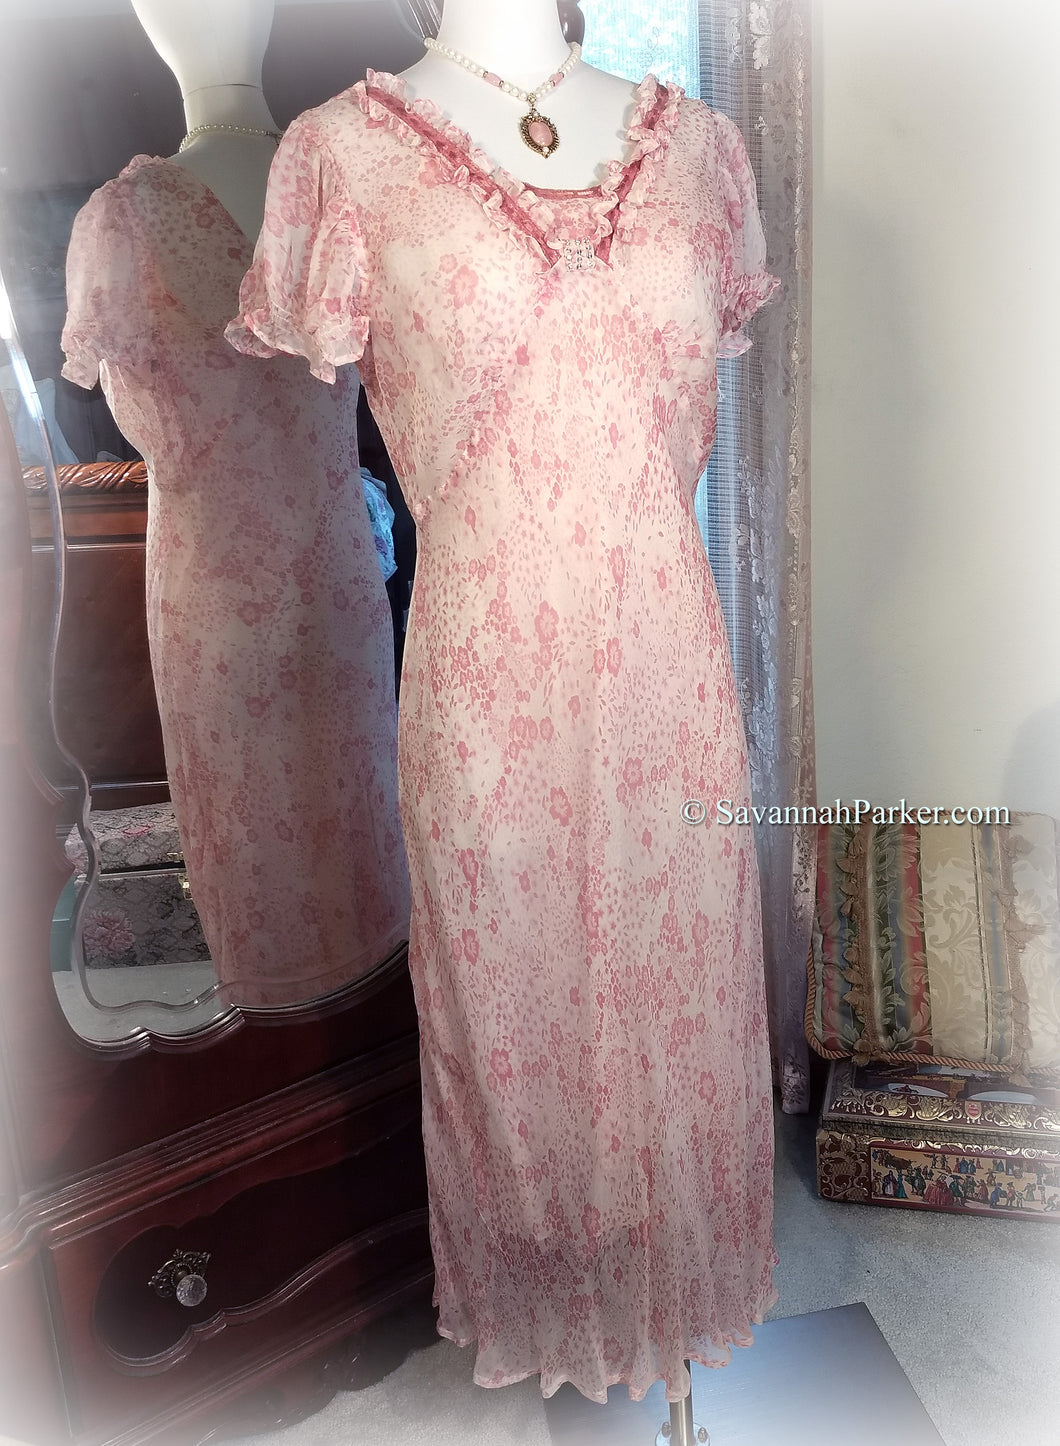 SOLD Delicious Vintage April Cornell - Pink and White Print Sheer Bias Chiffon - Garden Party Tea Dress - Cottagecore - Sweet Shabby Chic